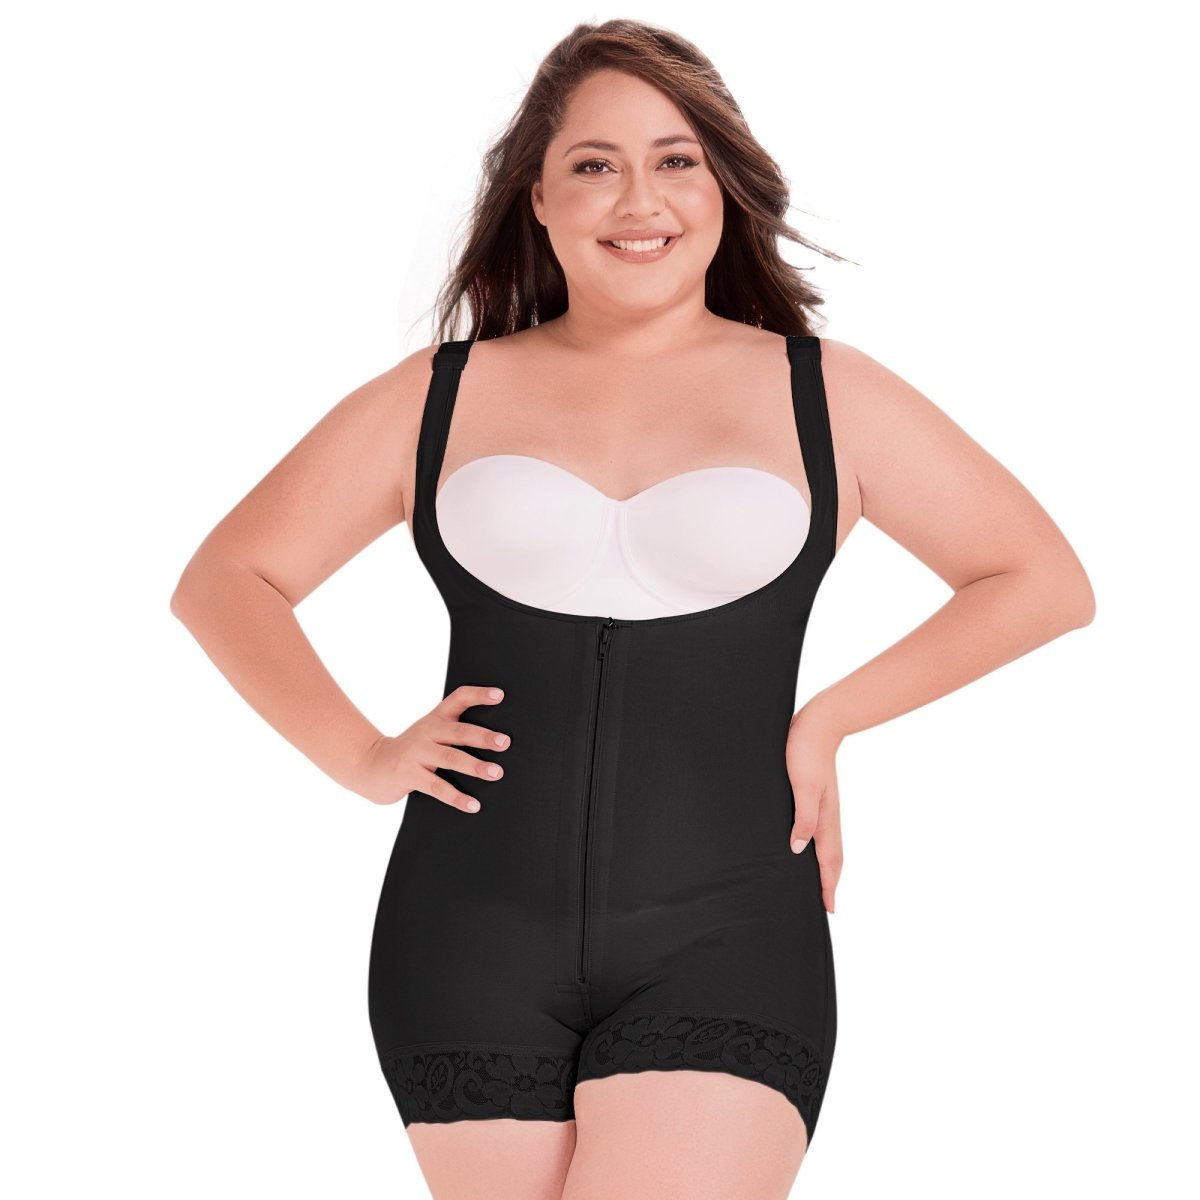 MariaE 9831 Body Shaper for Daily Use / Open Bust with Front Zipper - Colombian Body Shaper